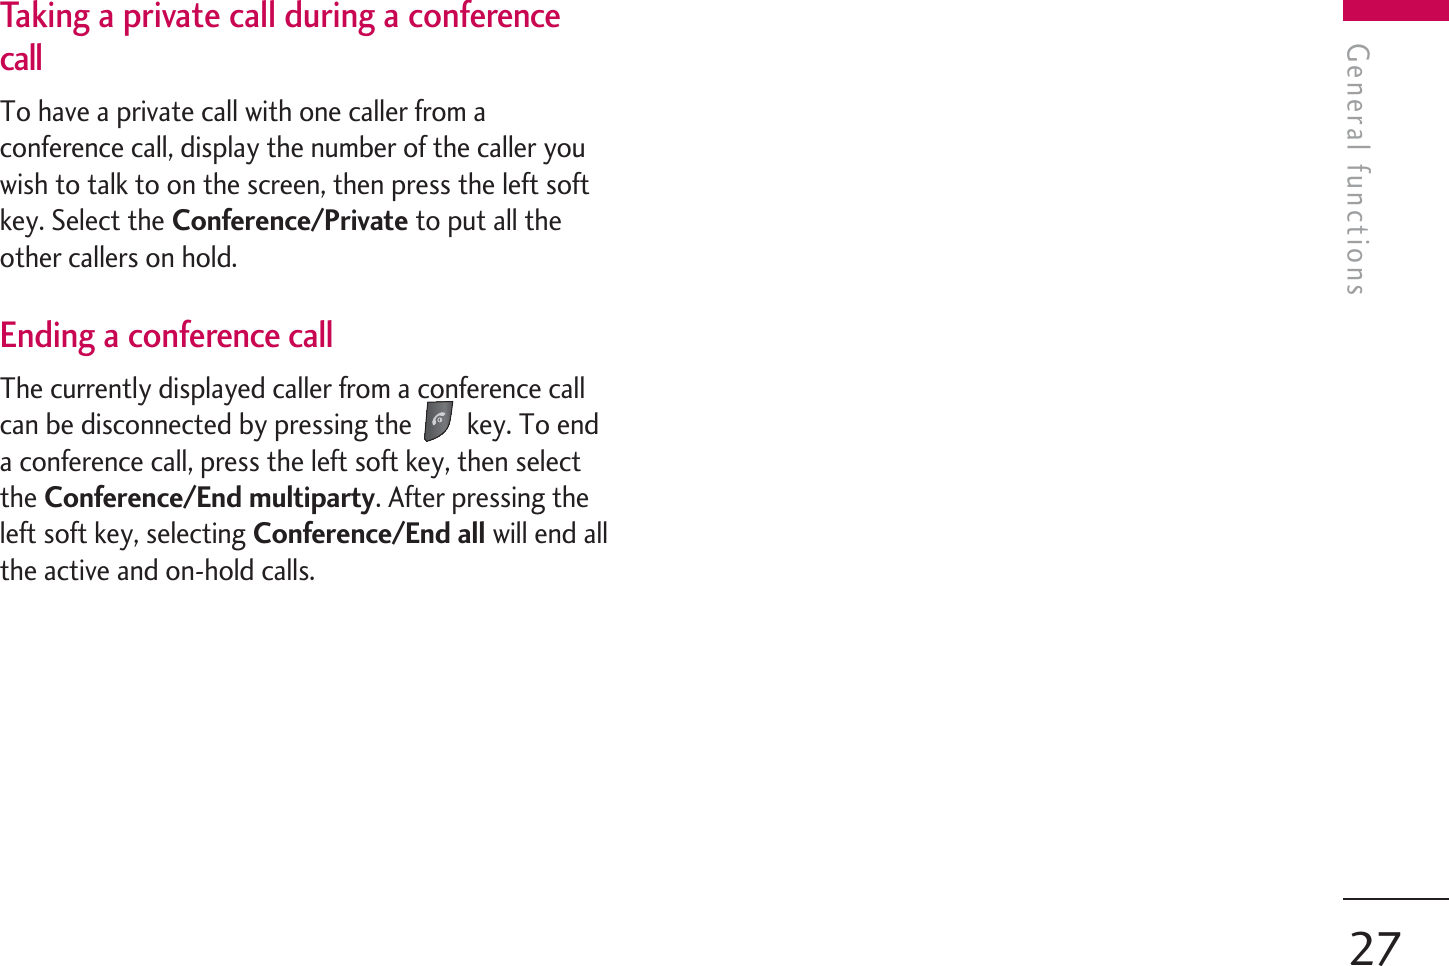 Taking a private call during a conferencecallTo have a private call with one caller from aconference call, display the number of the caller youwish to talk to on the screen, then press the left softkey. Select the Conference/Private to put all theother callers on hold.Ending a conference callThe currently displayed caller from a conference callcan be disconnected by pressing the  key. To enda conference call, press the left soft key, then selectthe Conference/End multiparty. After pressing theleft soft key, selecting Conference/End all will end allthe active and on-hold calls.General functions27